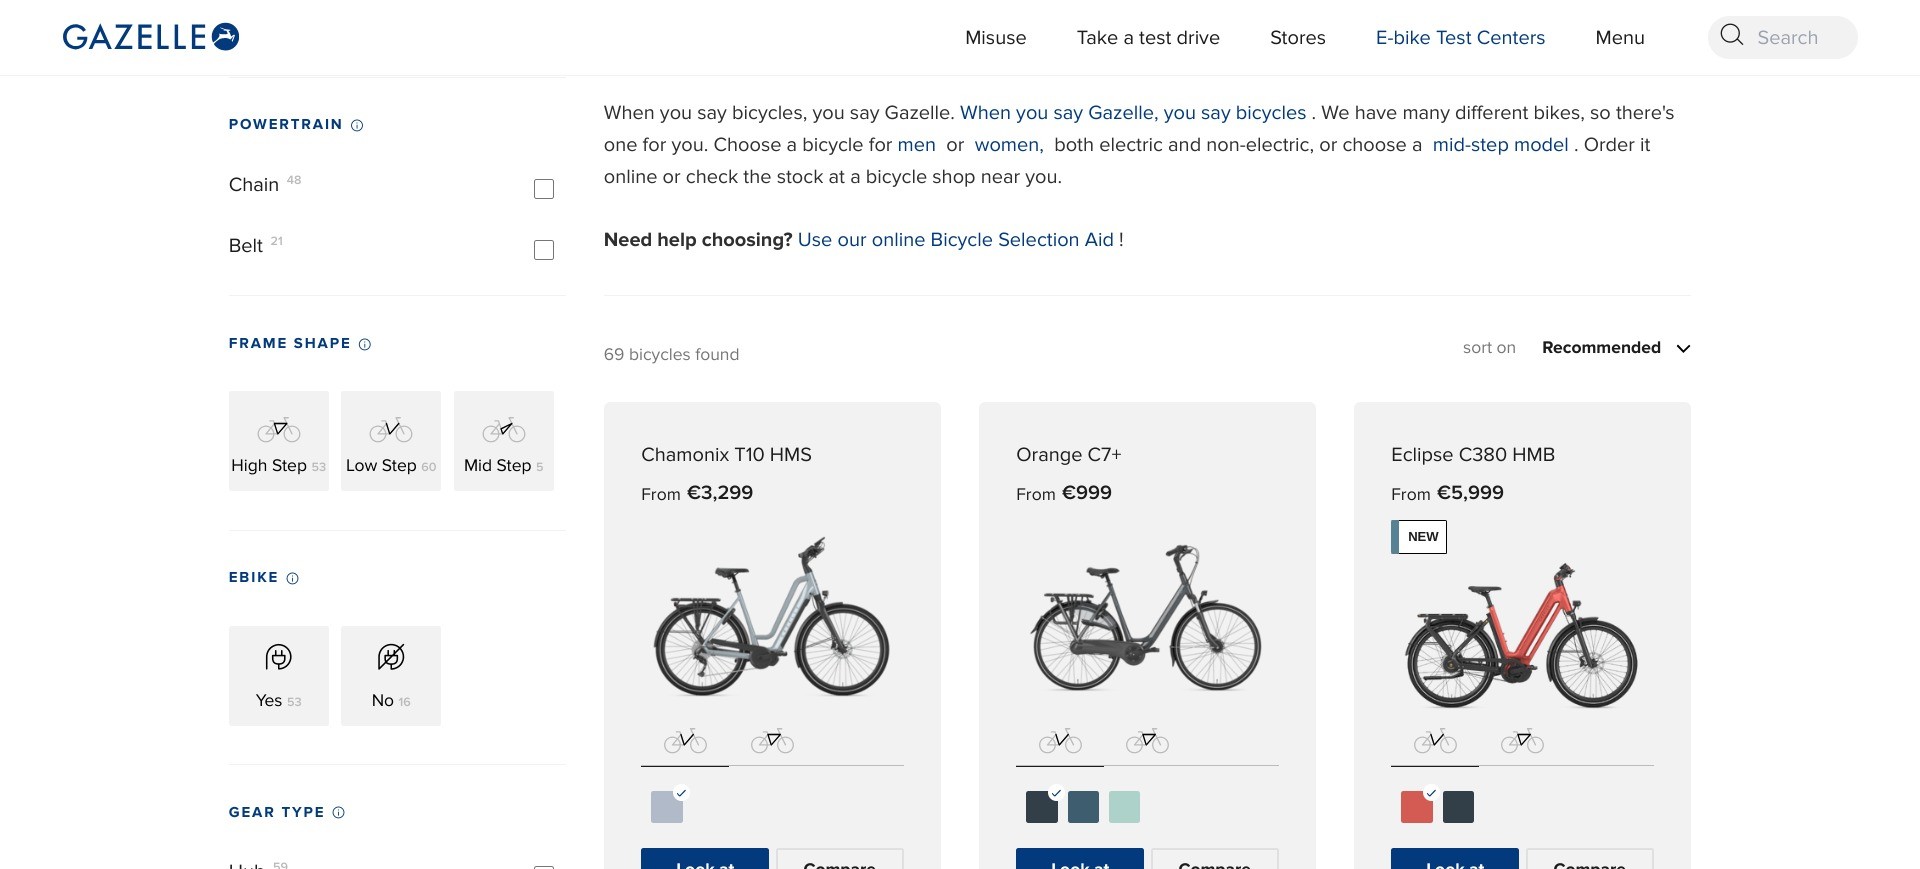 Screenshot of https://www.gazelle.nl/fietsen#page=1 displaying product listings. Translated into English by Google Translate